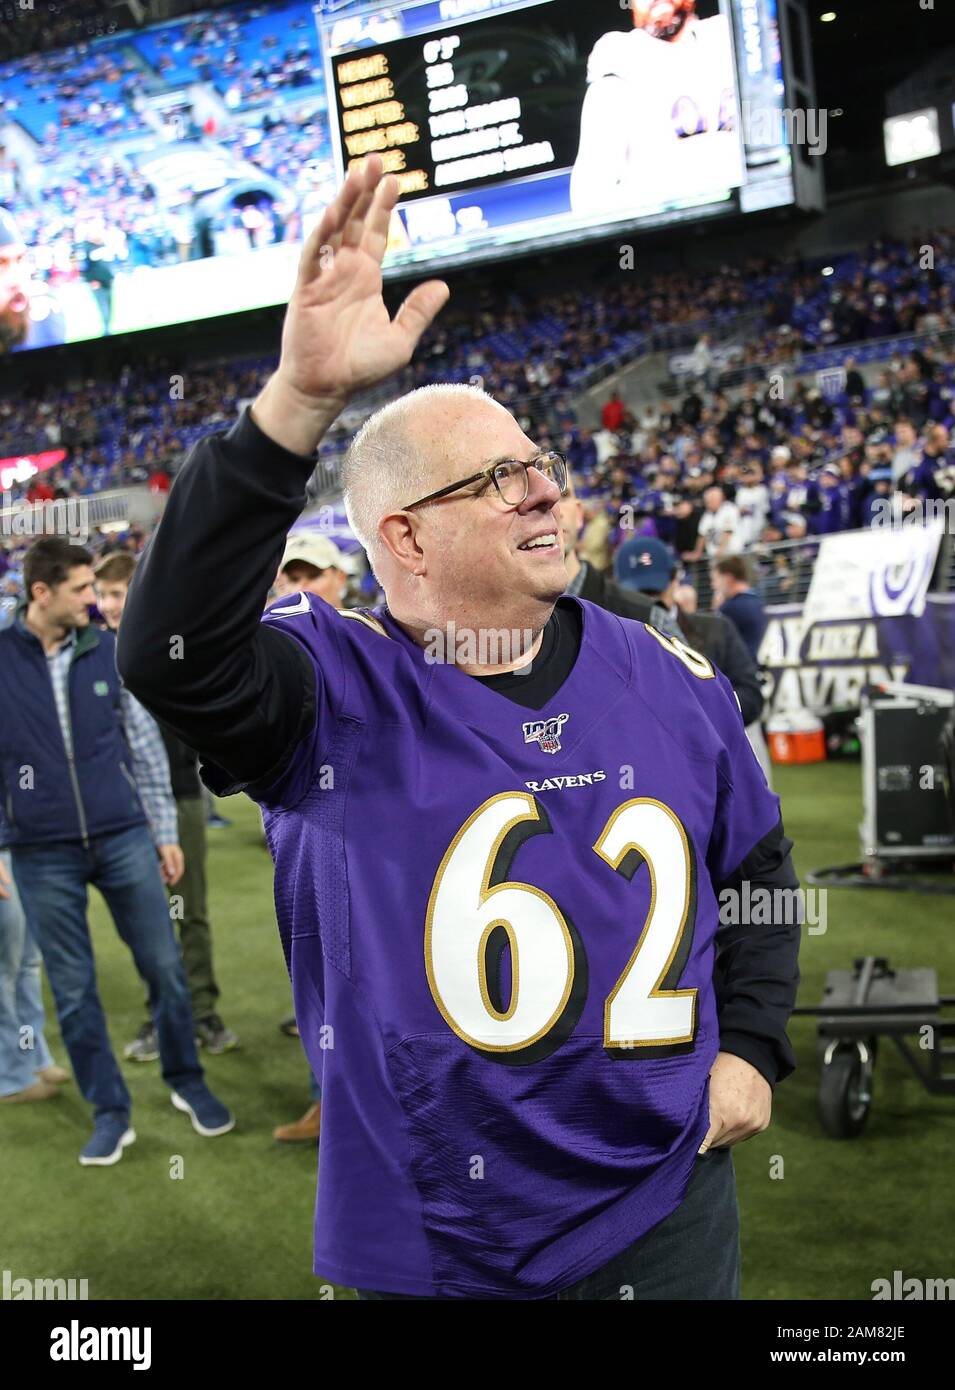 Maryland Governor Larry Hogan waves to fans prior to the AFC divisional playoff between the Baltimore Ravens and Tennessee Titans at M&T Bank Stadium in Baltimore, Maryland on January 11, 2020. Photo/ Mike Buscher/Cal Sport Media Stock Photo